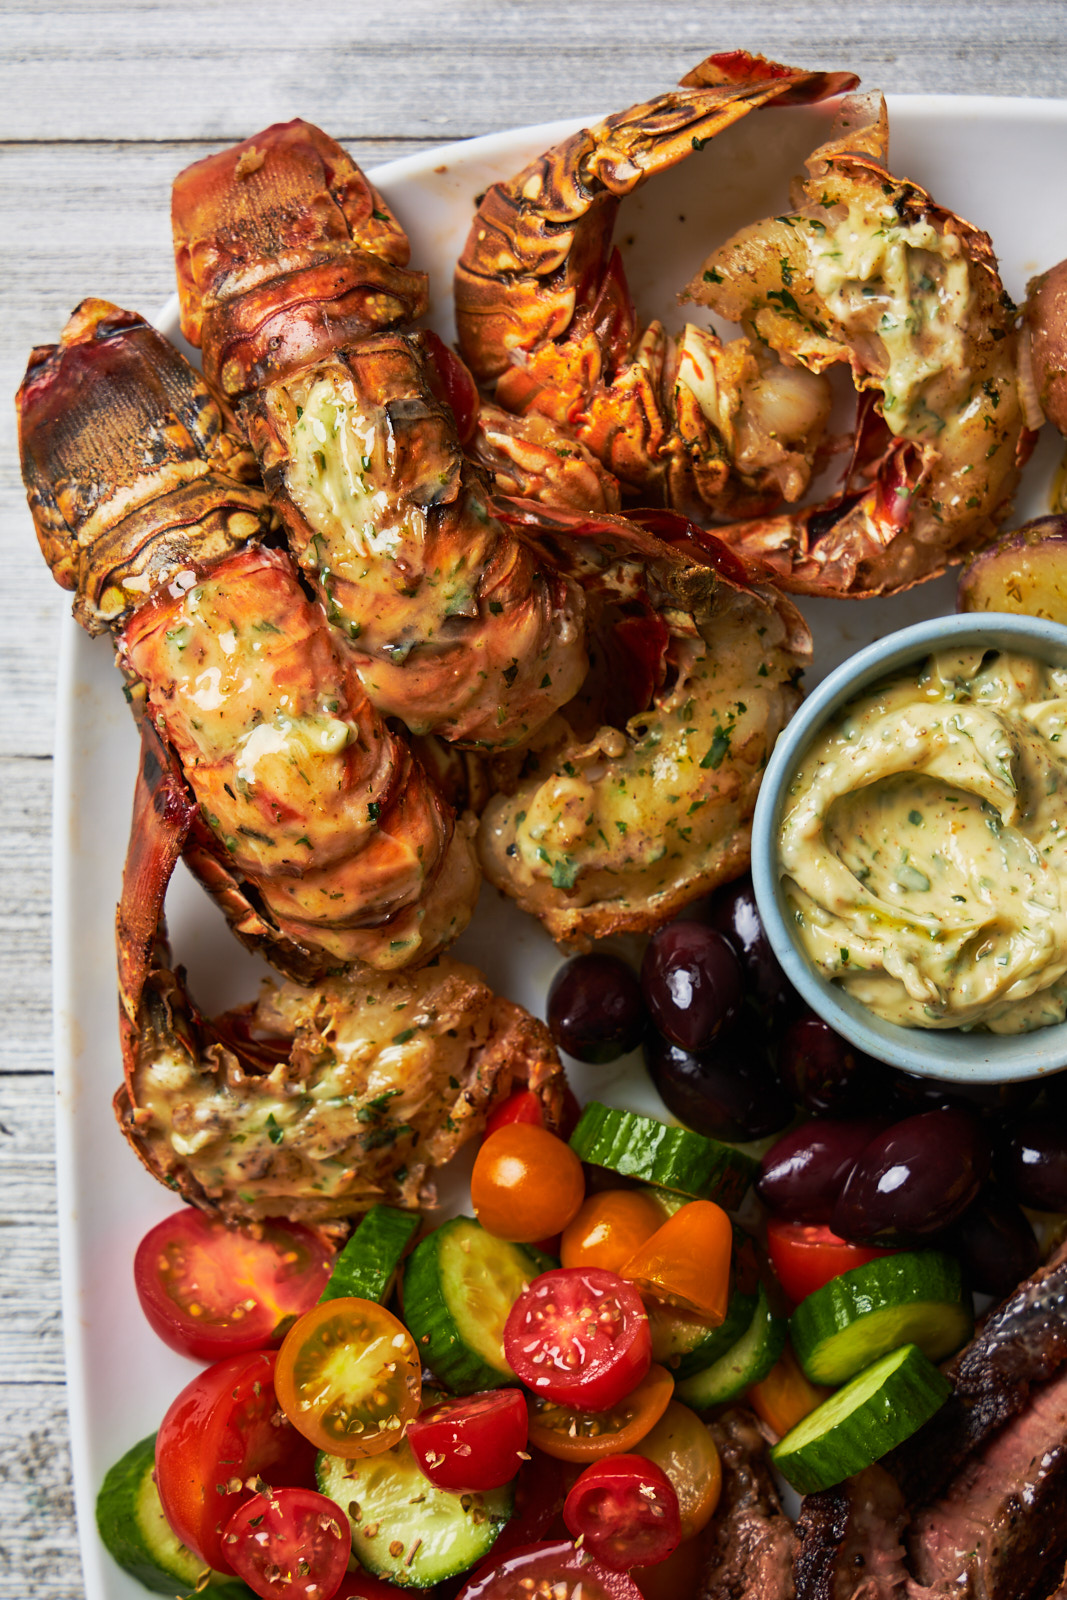 Grilled Lobster Tail and Steak Platter